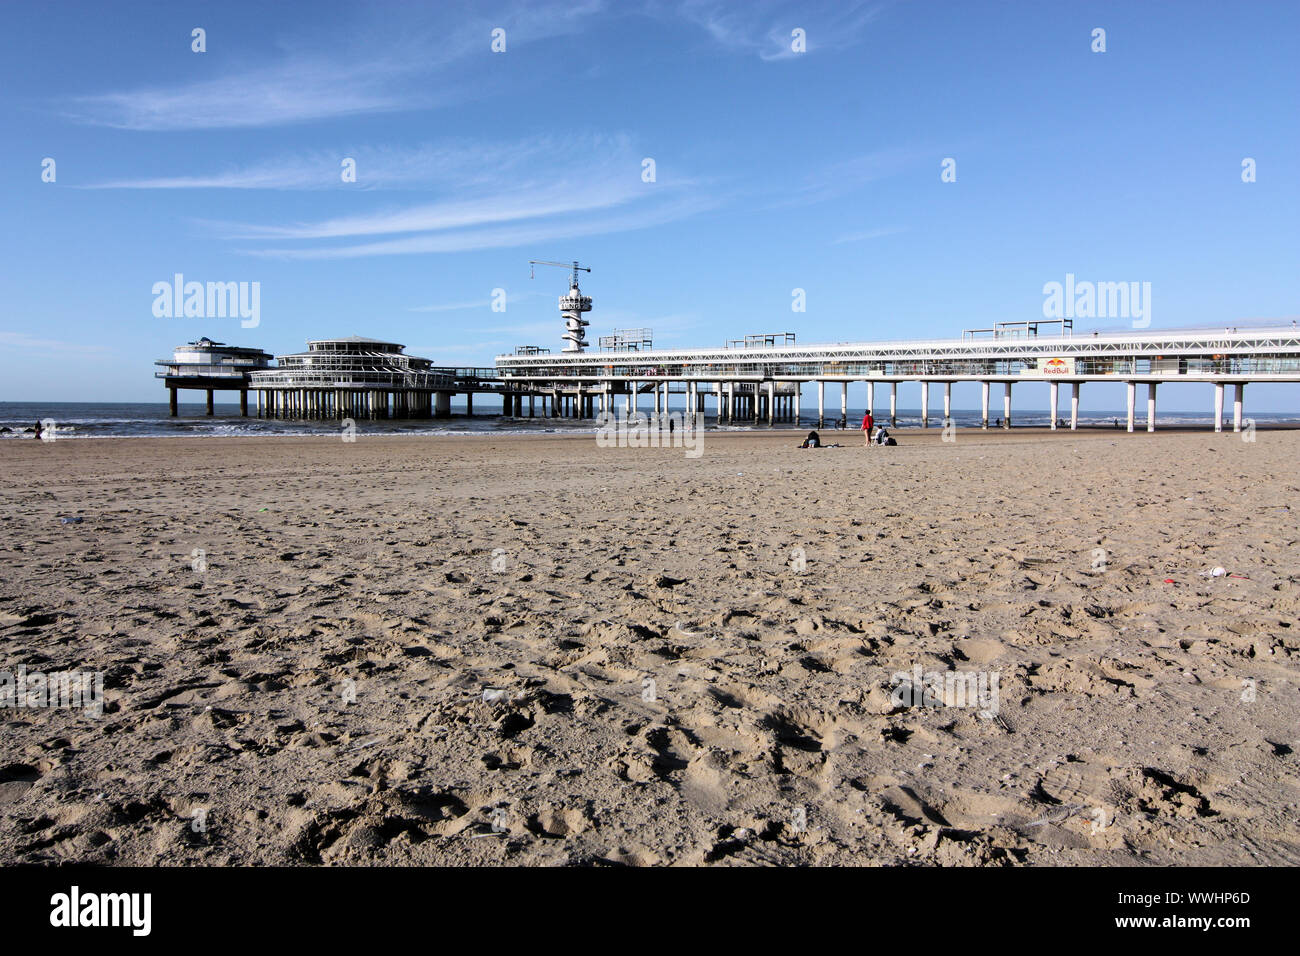 Scheveningen beach The Hague, the most popular stretch of sand in Holland. It is a great place for walking, sunning and swimming, as well as surfing. Stock Photo